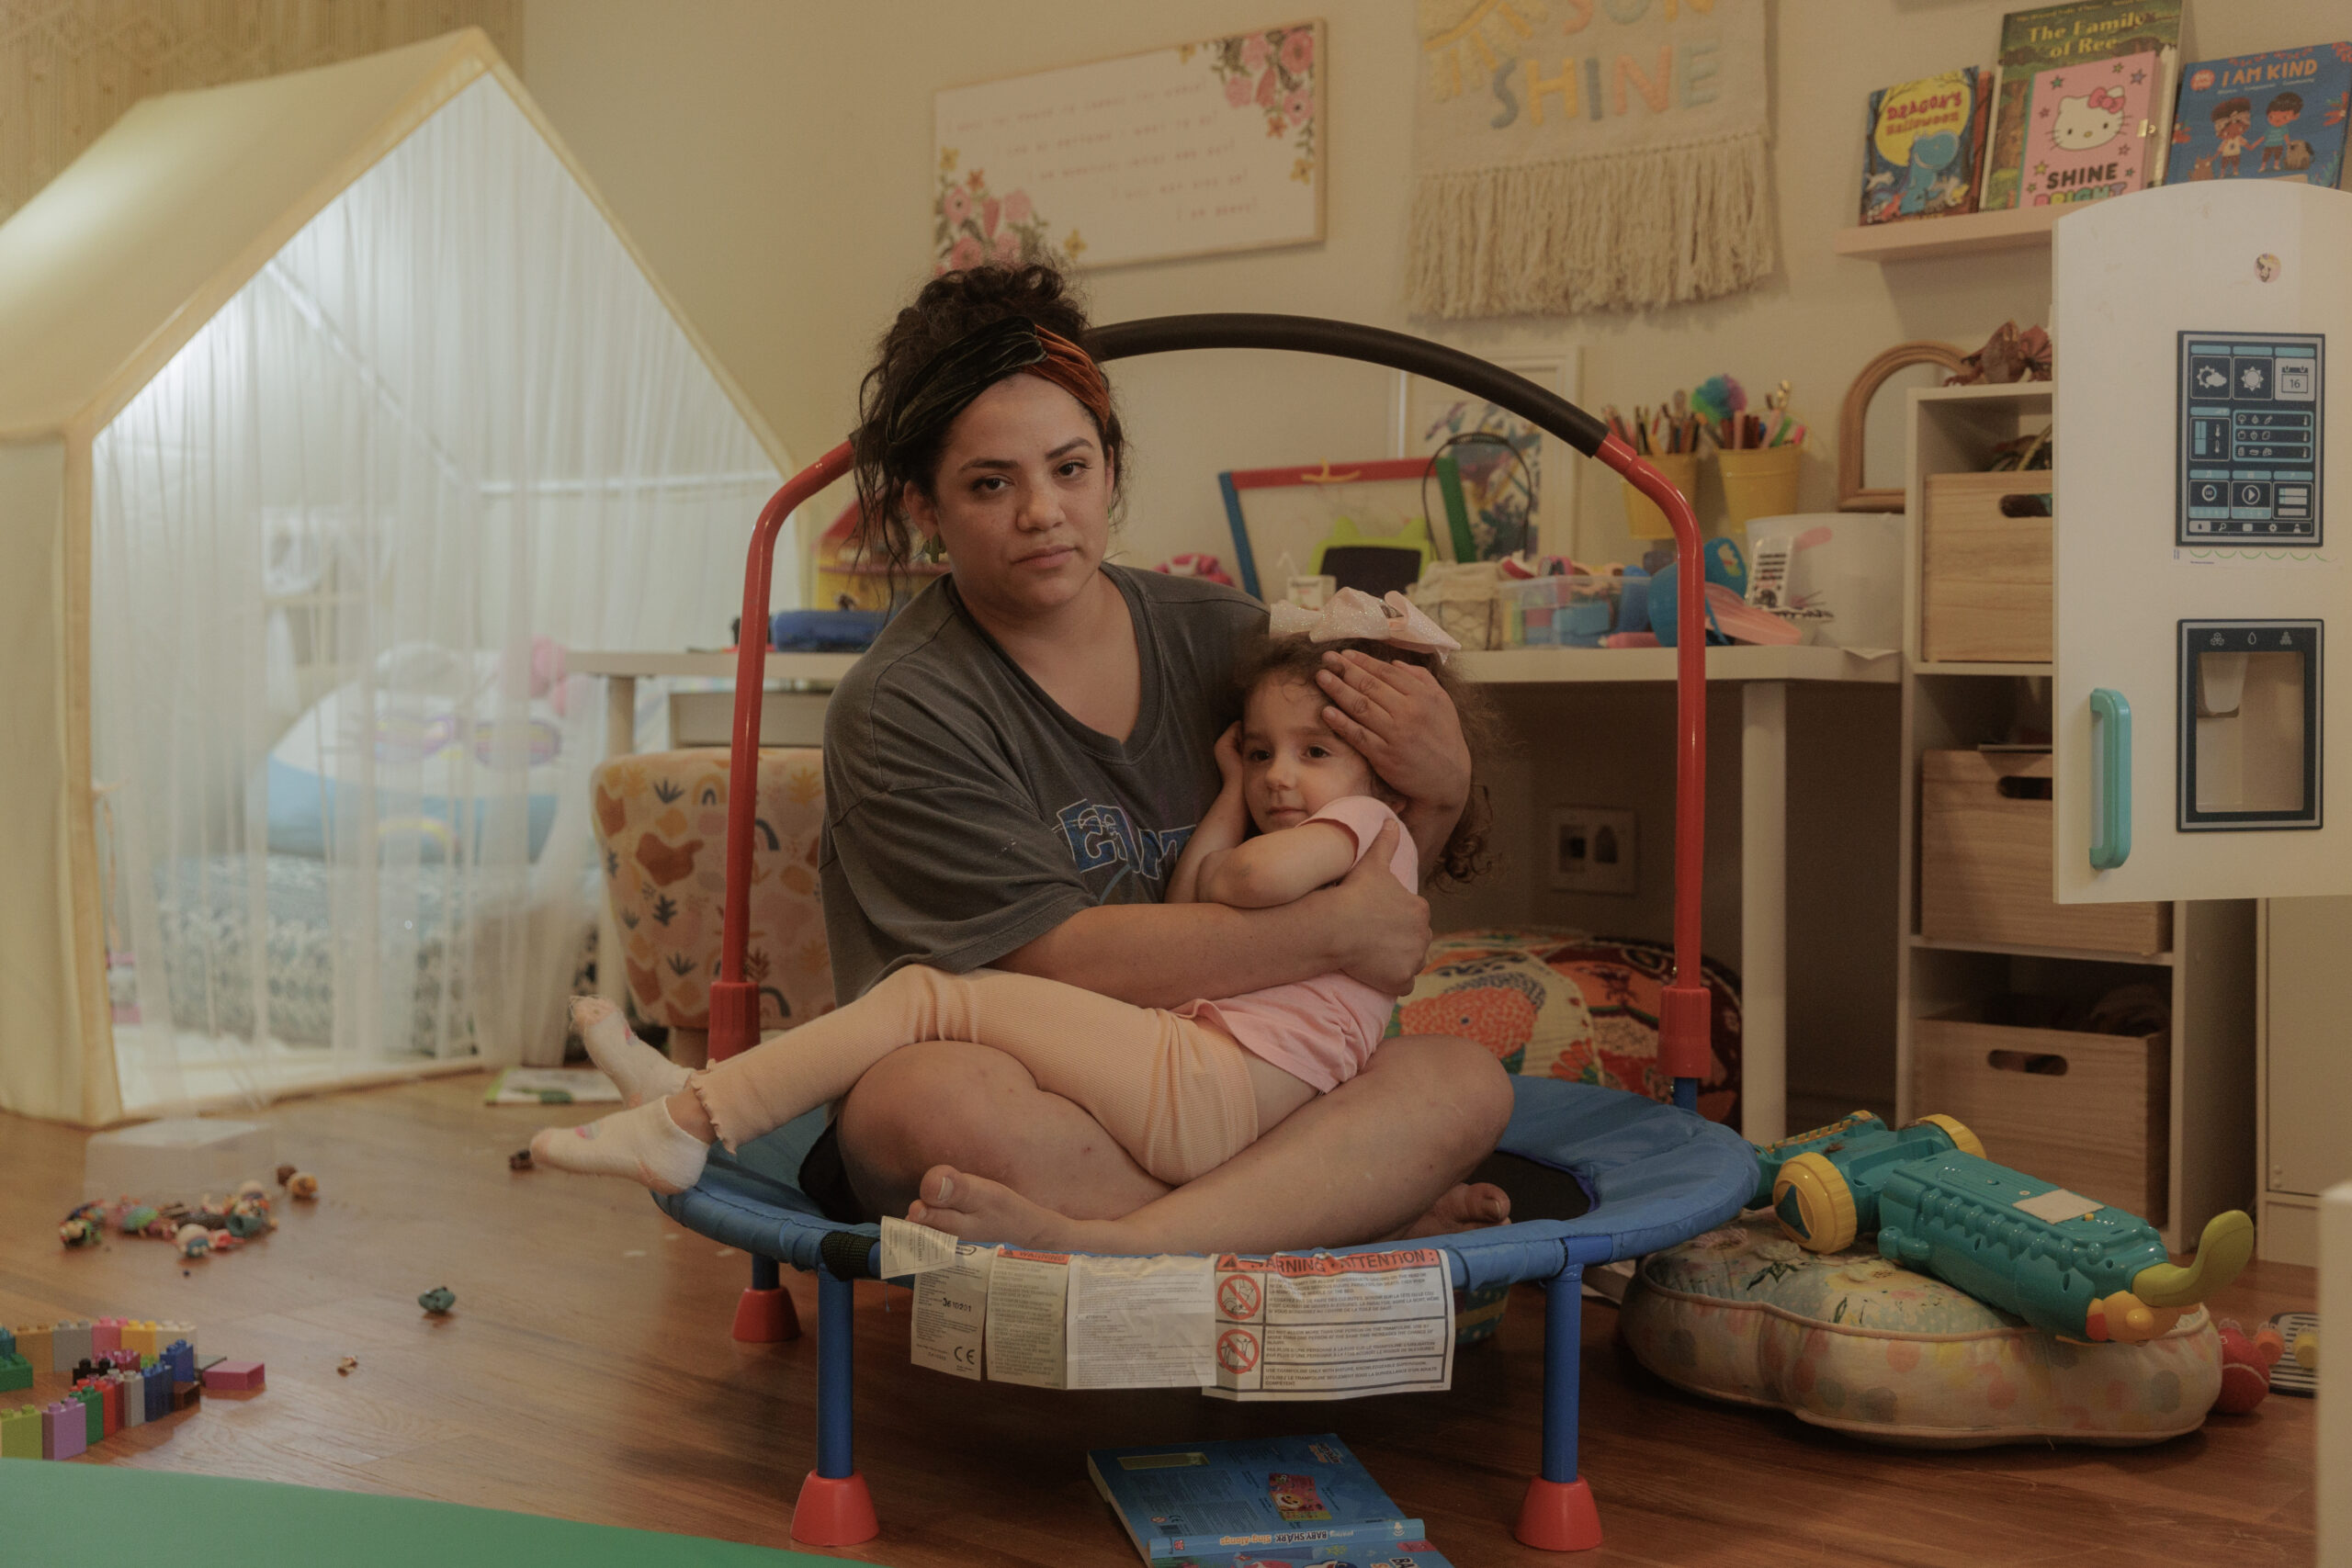 A Latinx woman cradles her young toddler-aged daughter in her lap, both wearing a concerned expression. A typical playroom, with scattered toys and a play tent, form the photo's backdrop.